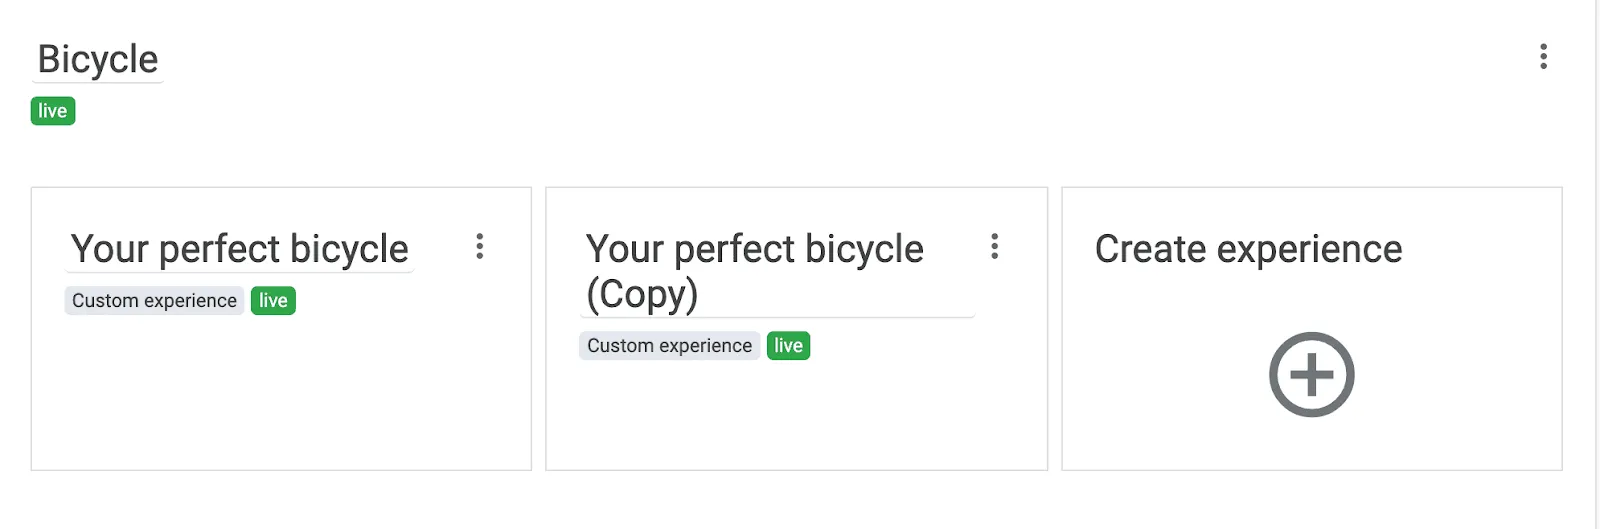 The chat experience "Your perfect bicylce" is copied.